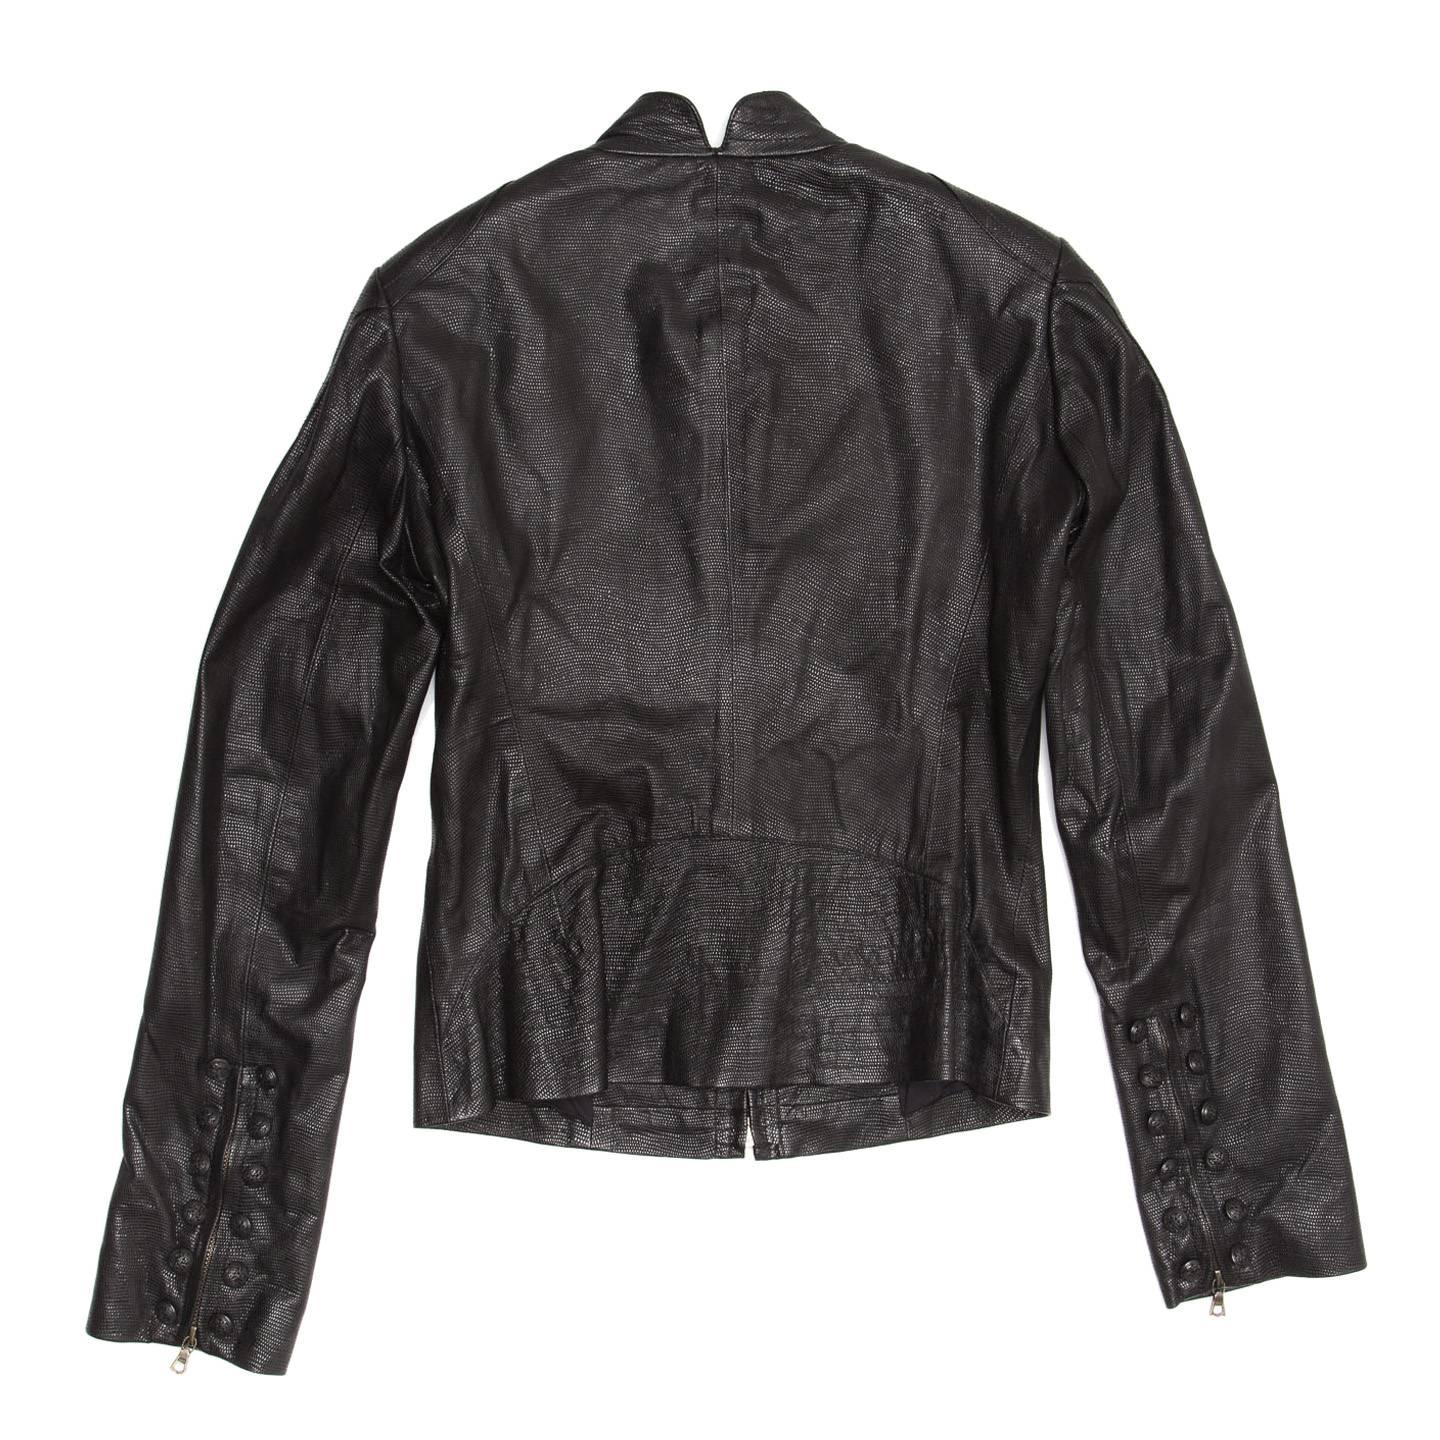 Lwren Scott Black Leather Zip Jacket In New Condition For Sale In Brooklyn, NY